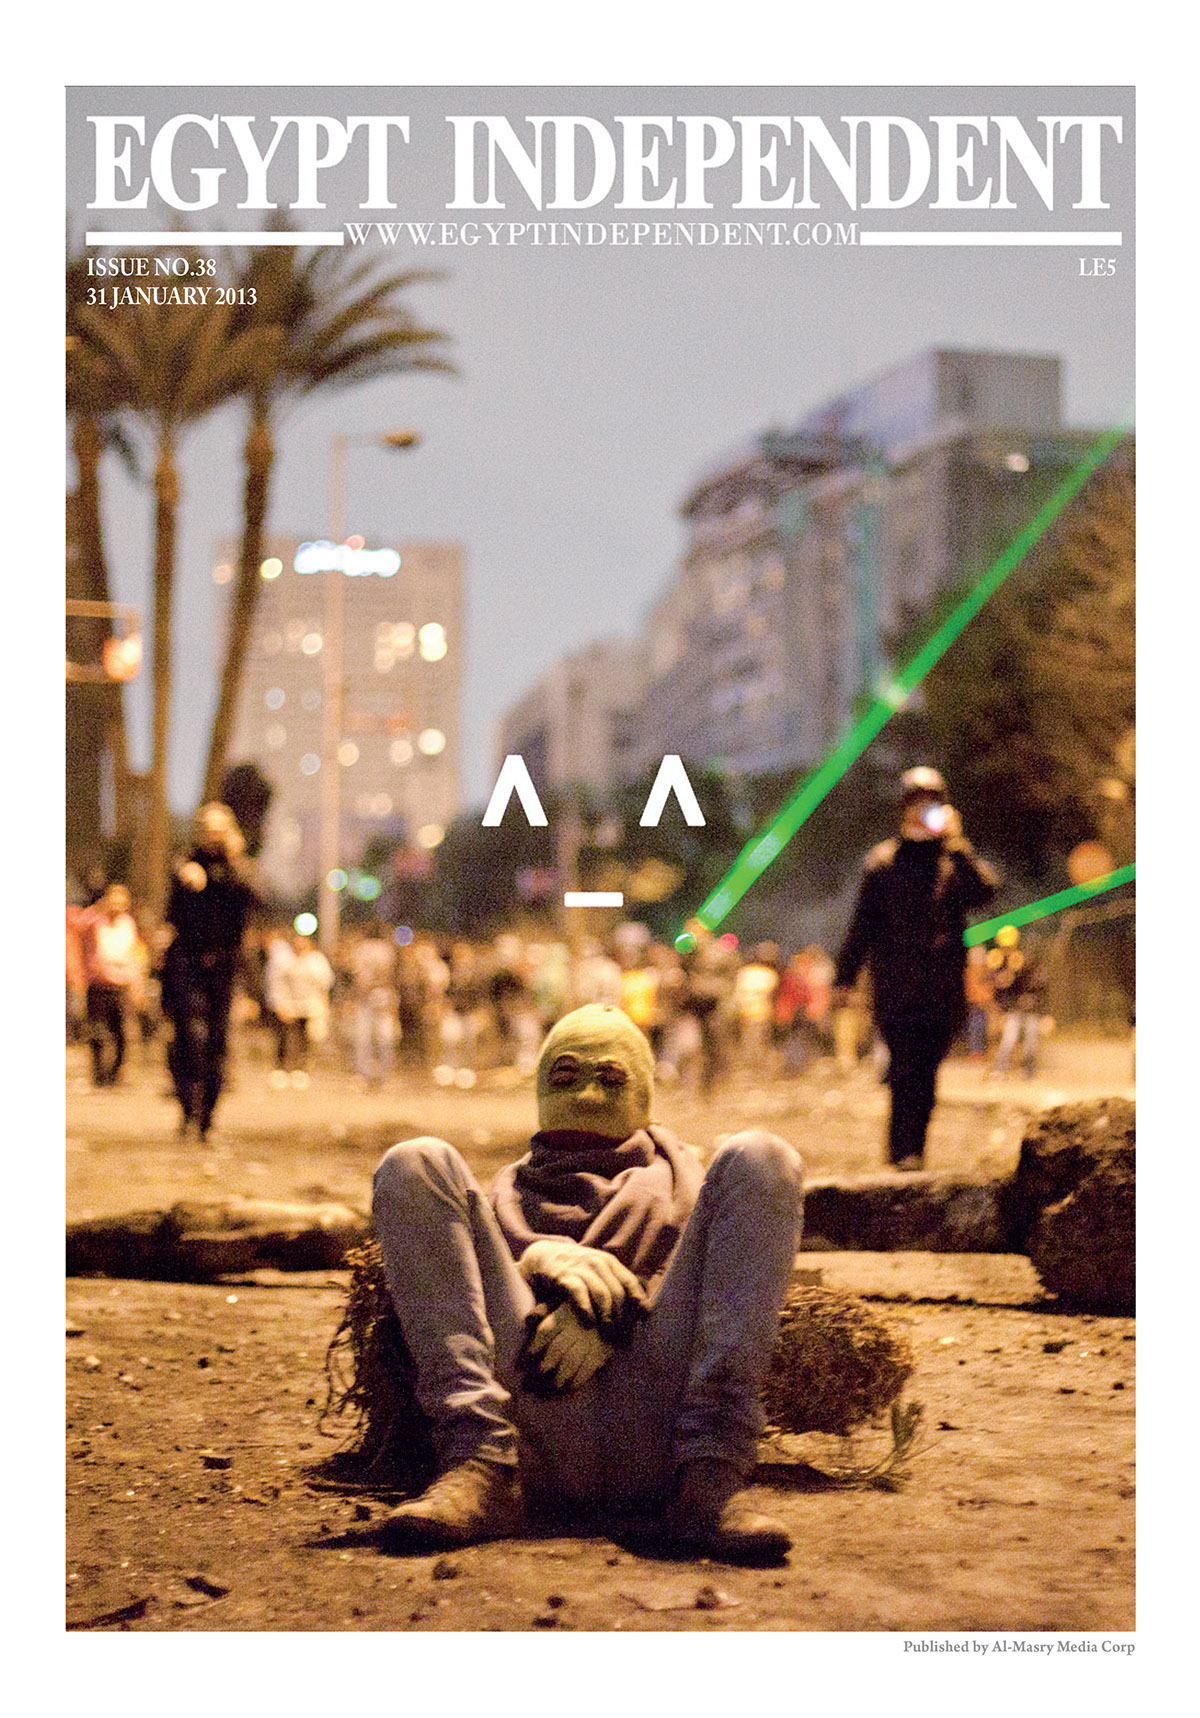 egypt independent News Paper andeel covers egyptian revolution